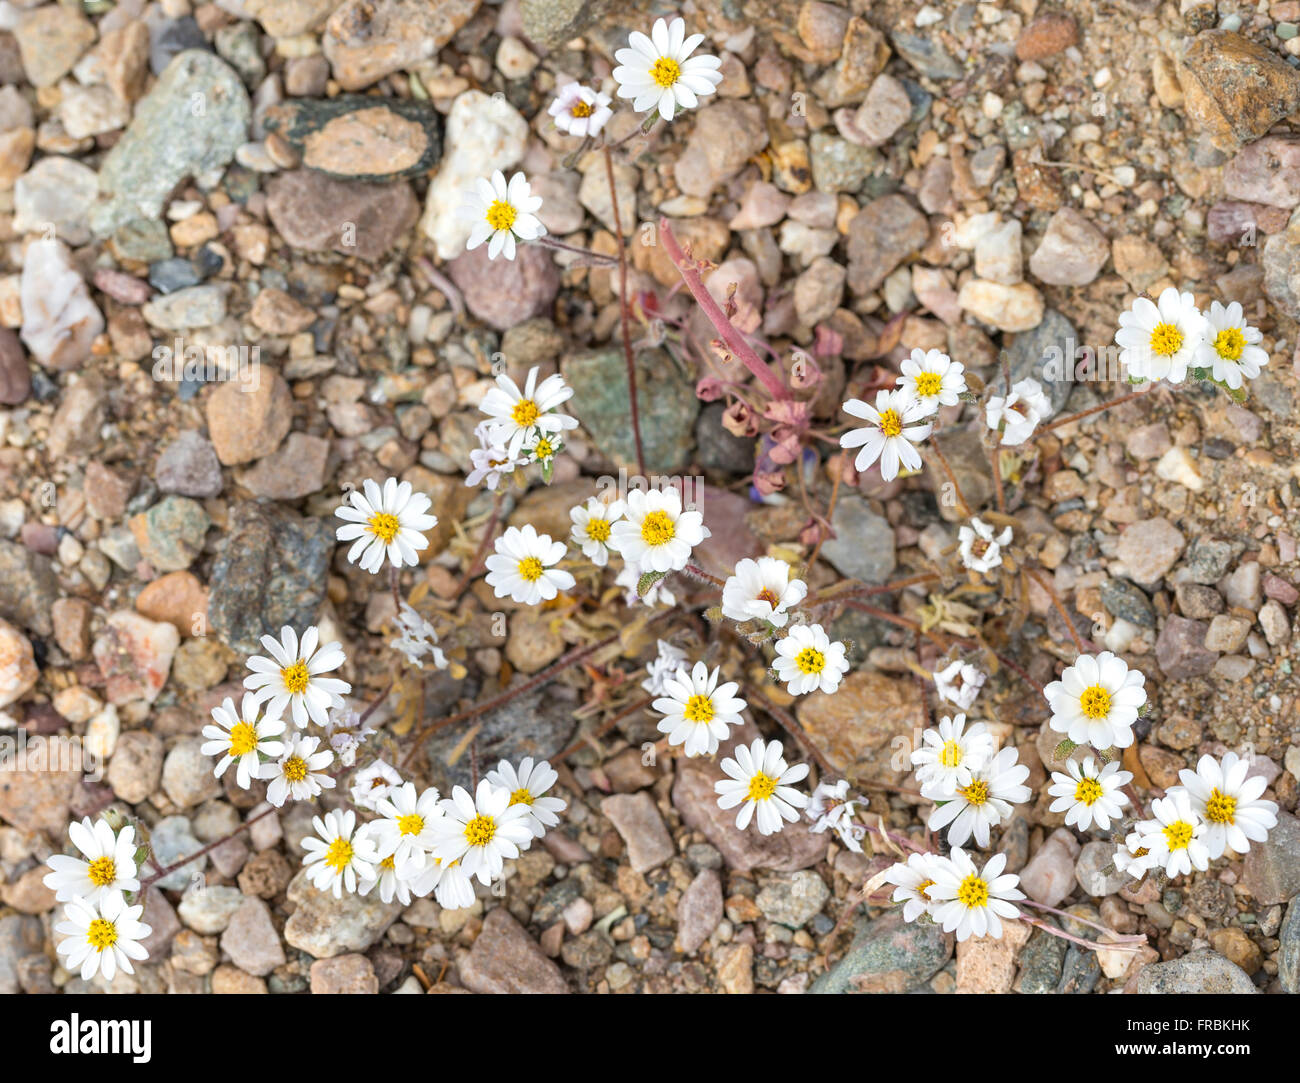 Emory's rock daisy (Perityle emoryi) during the 2016 Super Bloom in Death Valley National Park. Stock Photo